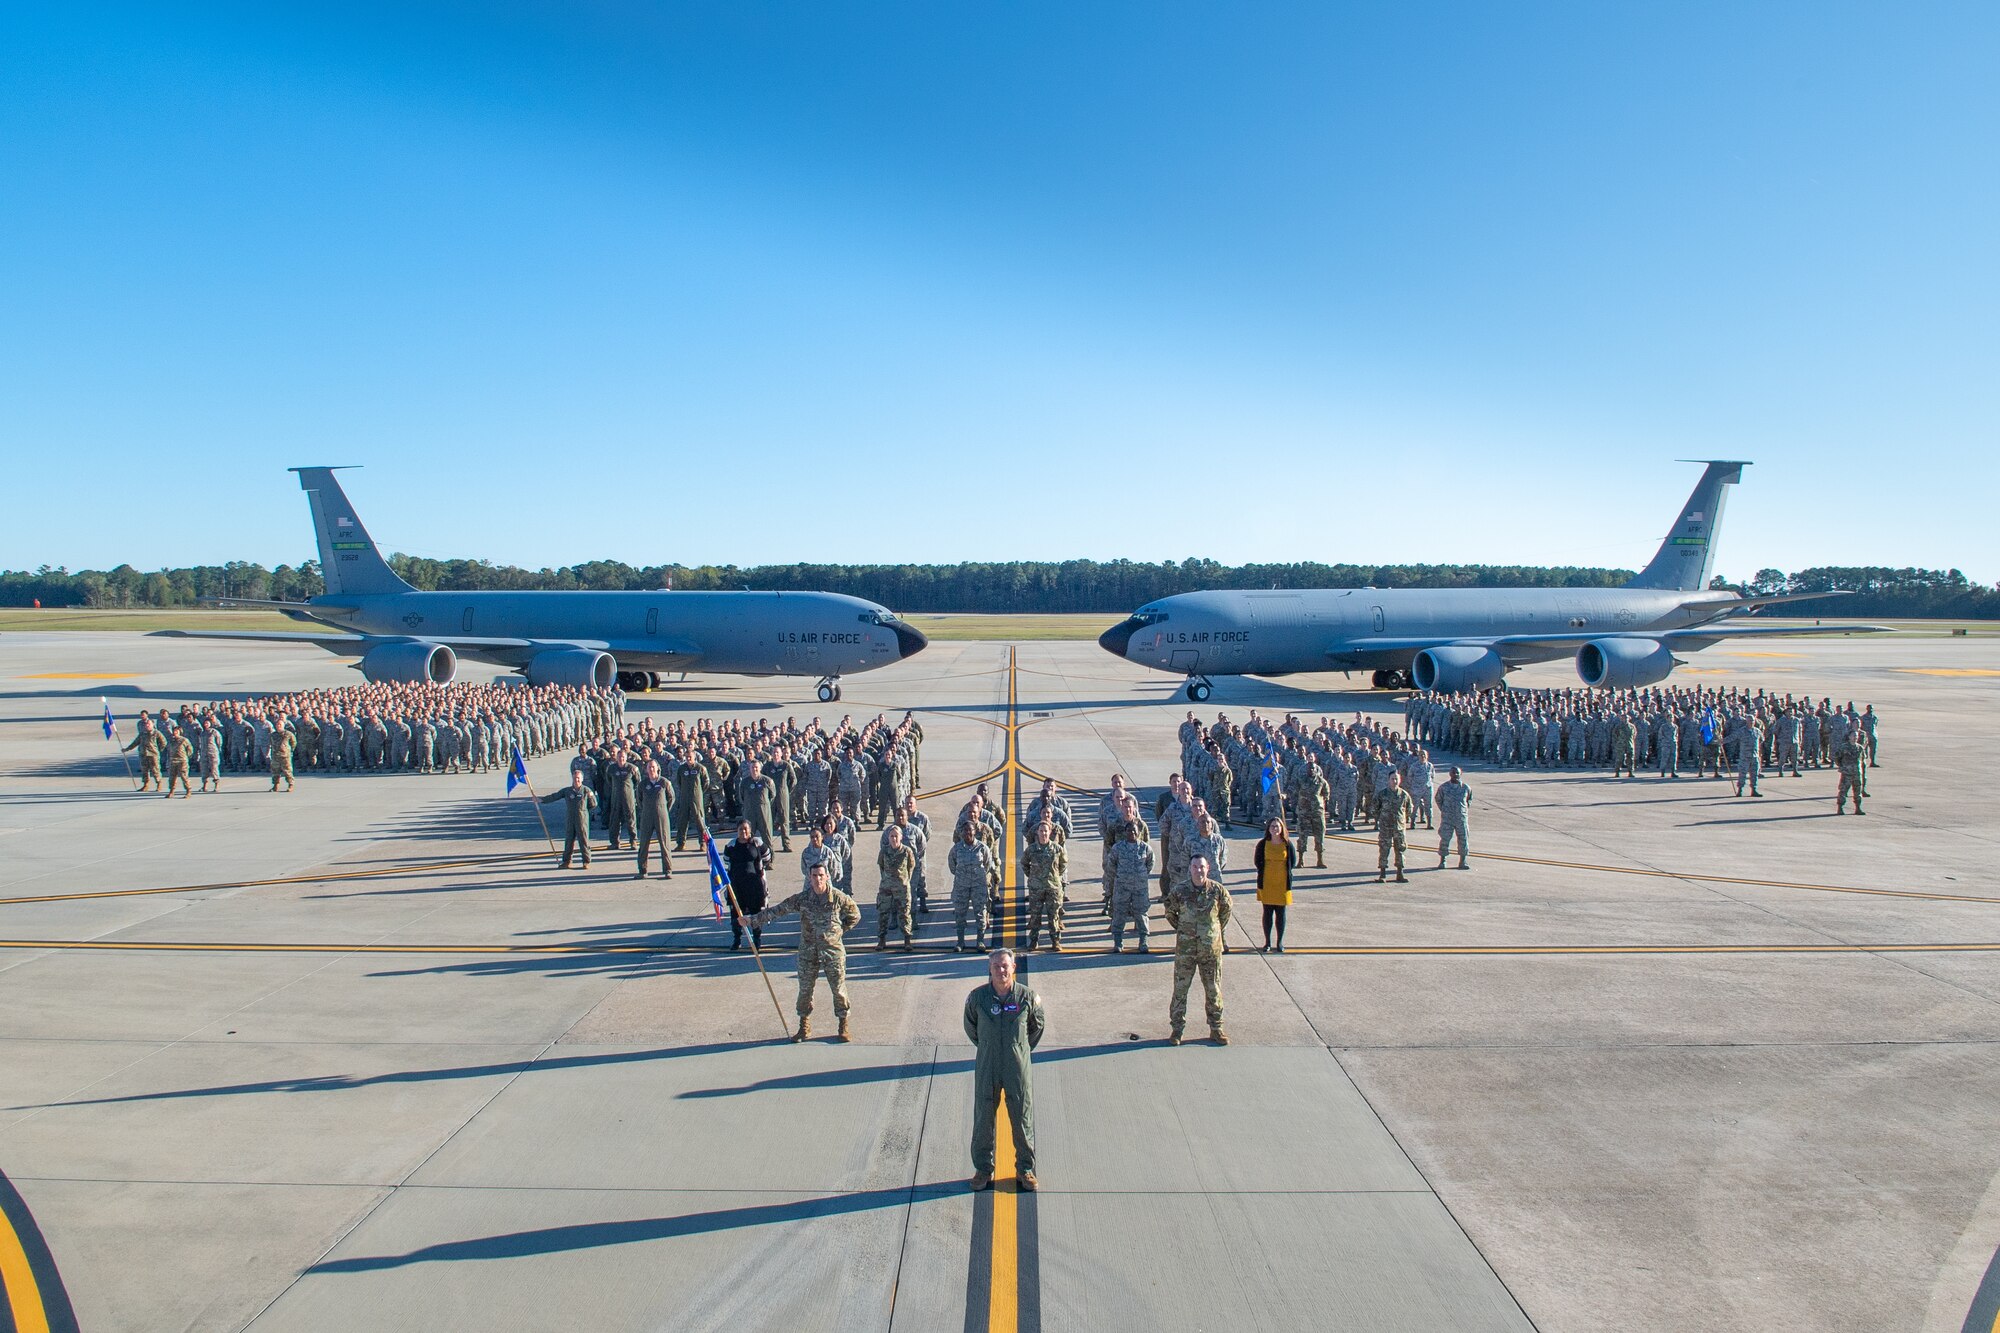 Col McPike and members of the 916th Air Refueling Wing all look to the future as they stand in front of the KC-135 for what could be their last group picture, as a wing, with the KC-135.